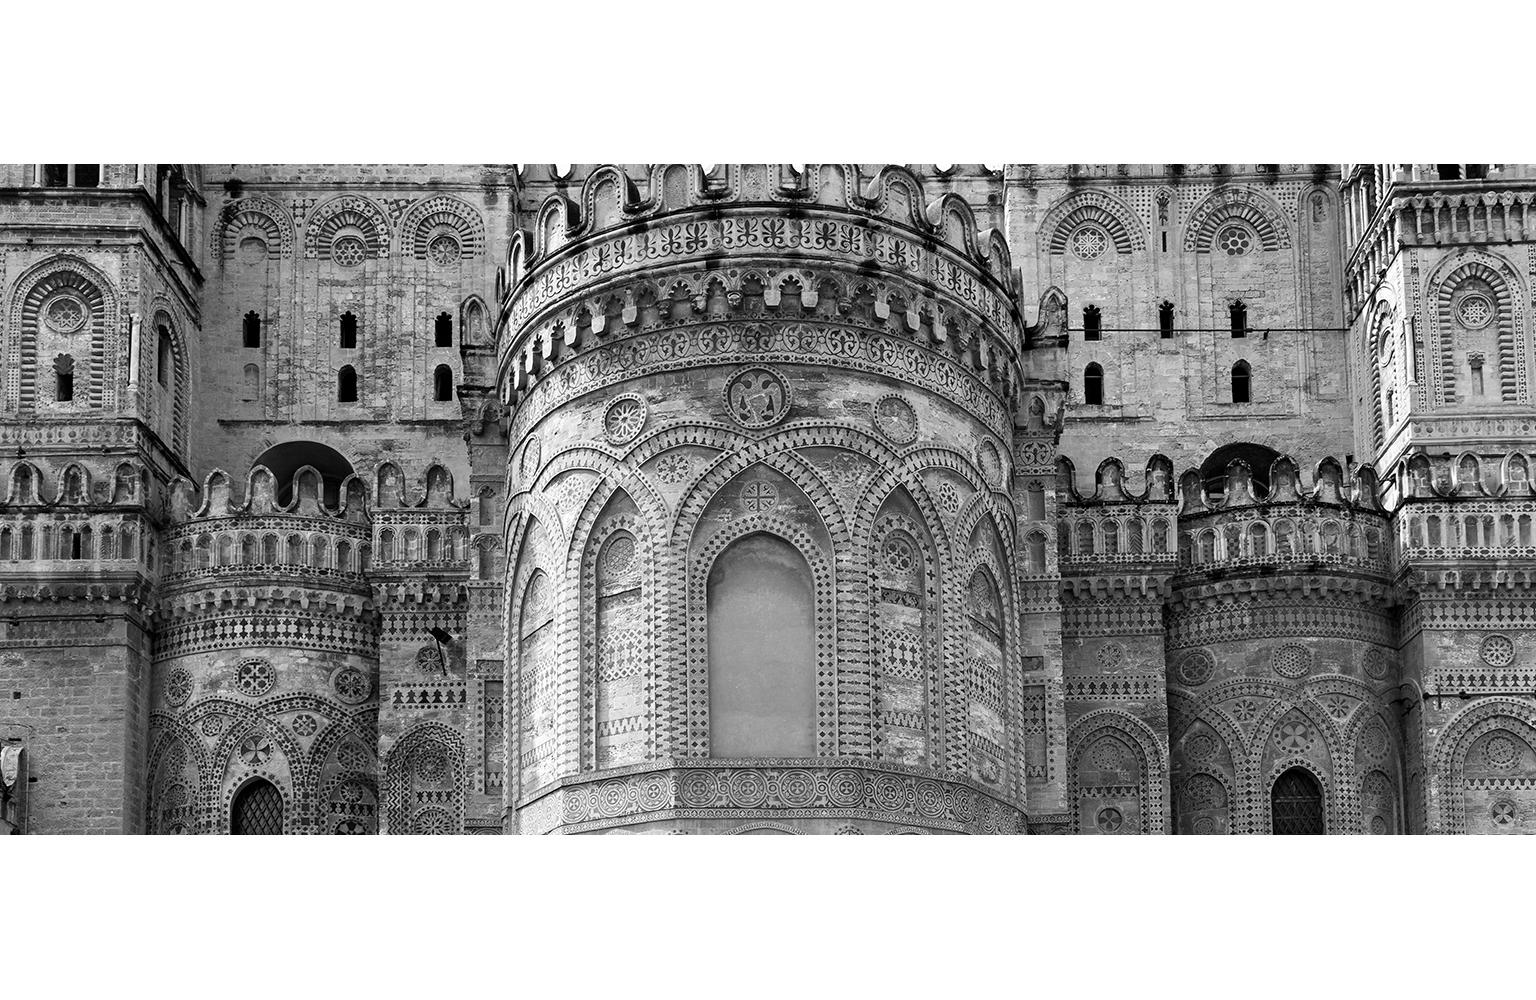 Palermo Cathedral: Detail, Palermo, Sicily, Italy,  2017.
Photograph by Cosmo Condina of  Palermo Cathedral, tones in black and white. Italy, Sicily, Palermo
Archival Pigment Print, 19” X 8.3”, Edition of 10. This is #3/10 in the edition.
 
Italy,